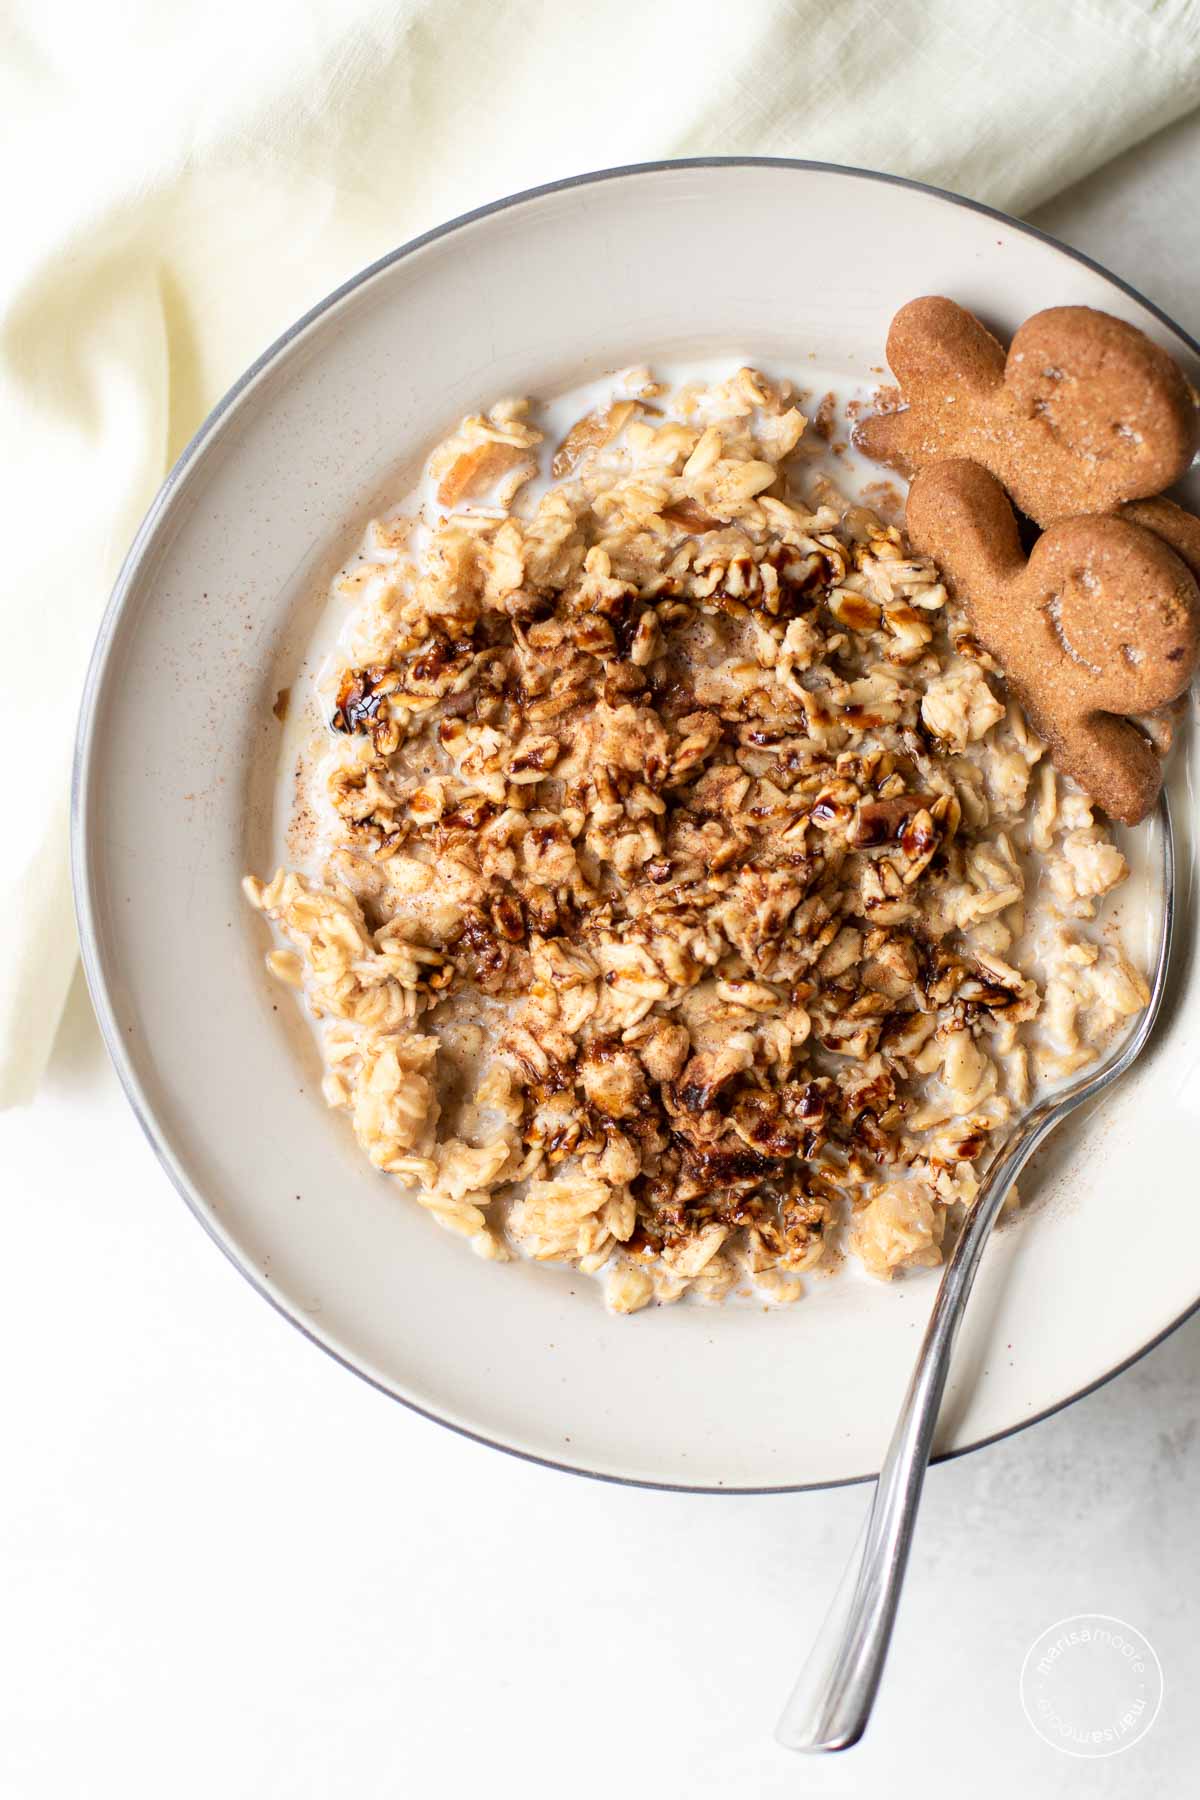 Gingerbread flavored oats in a bowl drizzled with molasses and garnished with gingerbread cookies